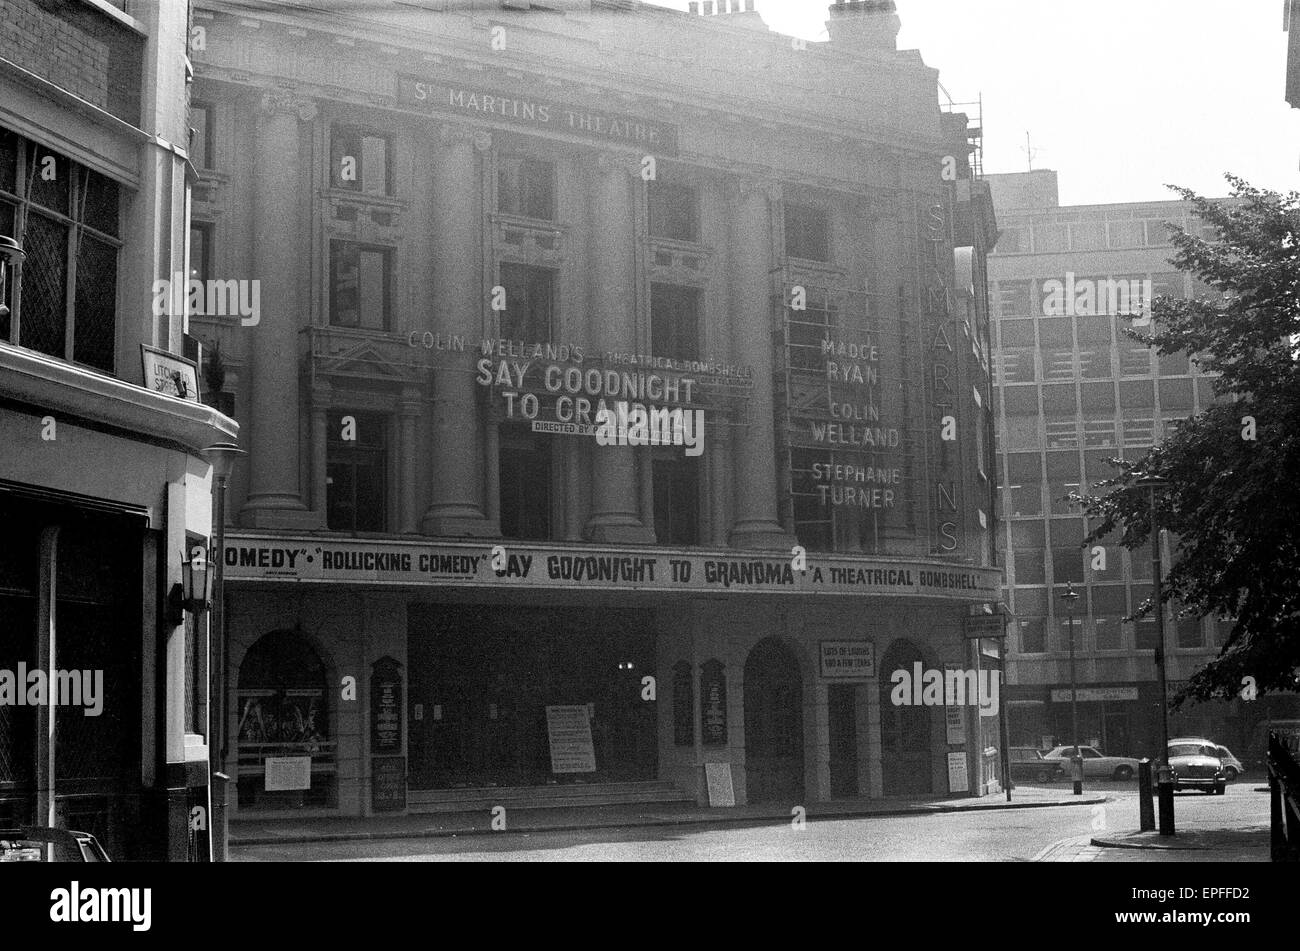 Exterior view of the St Martins Theatre in West Street, London Circa 1971. Stock Photo